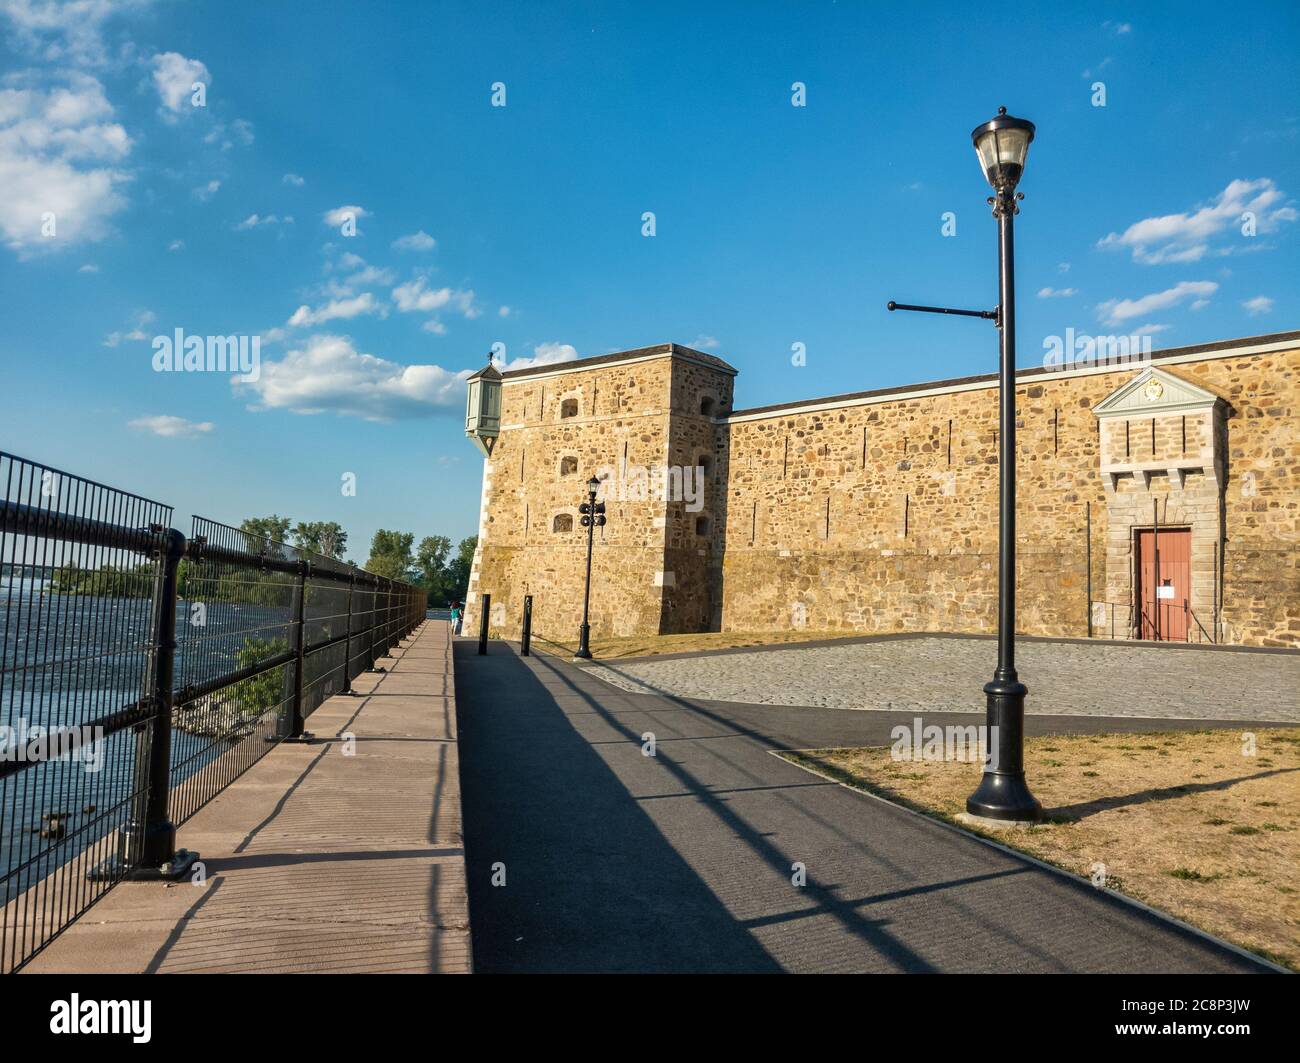 Chambly, Canada - 6 July 2020: Fort Chambly National Historic Site Stock Photo